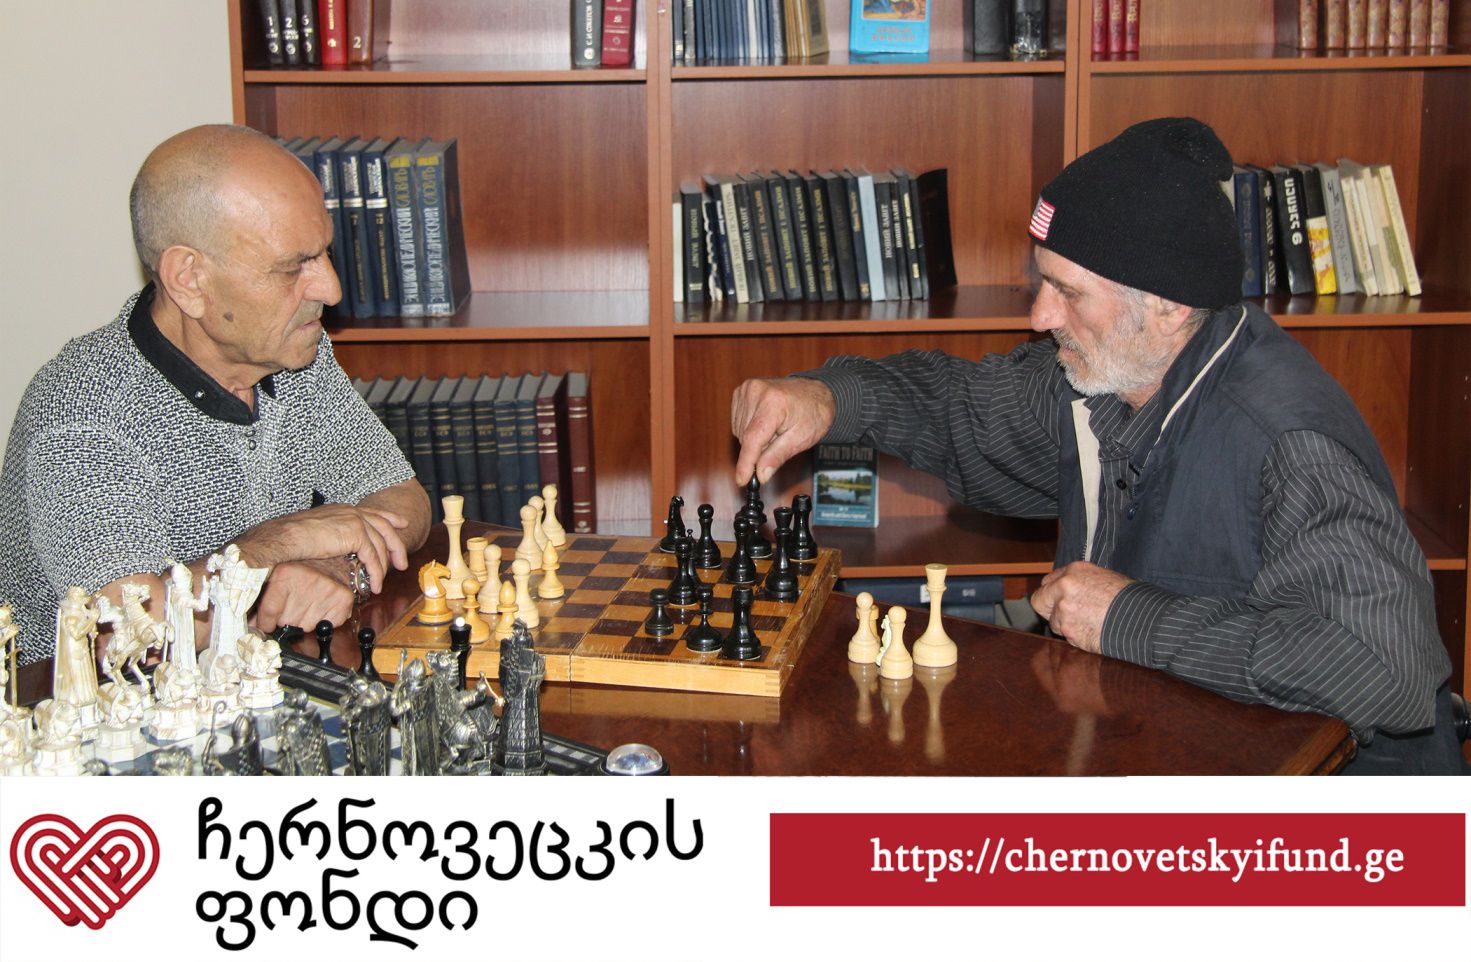 Chess tournaments among the beneficiaries of the Fund image